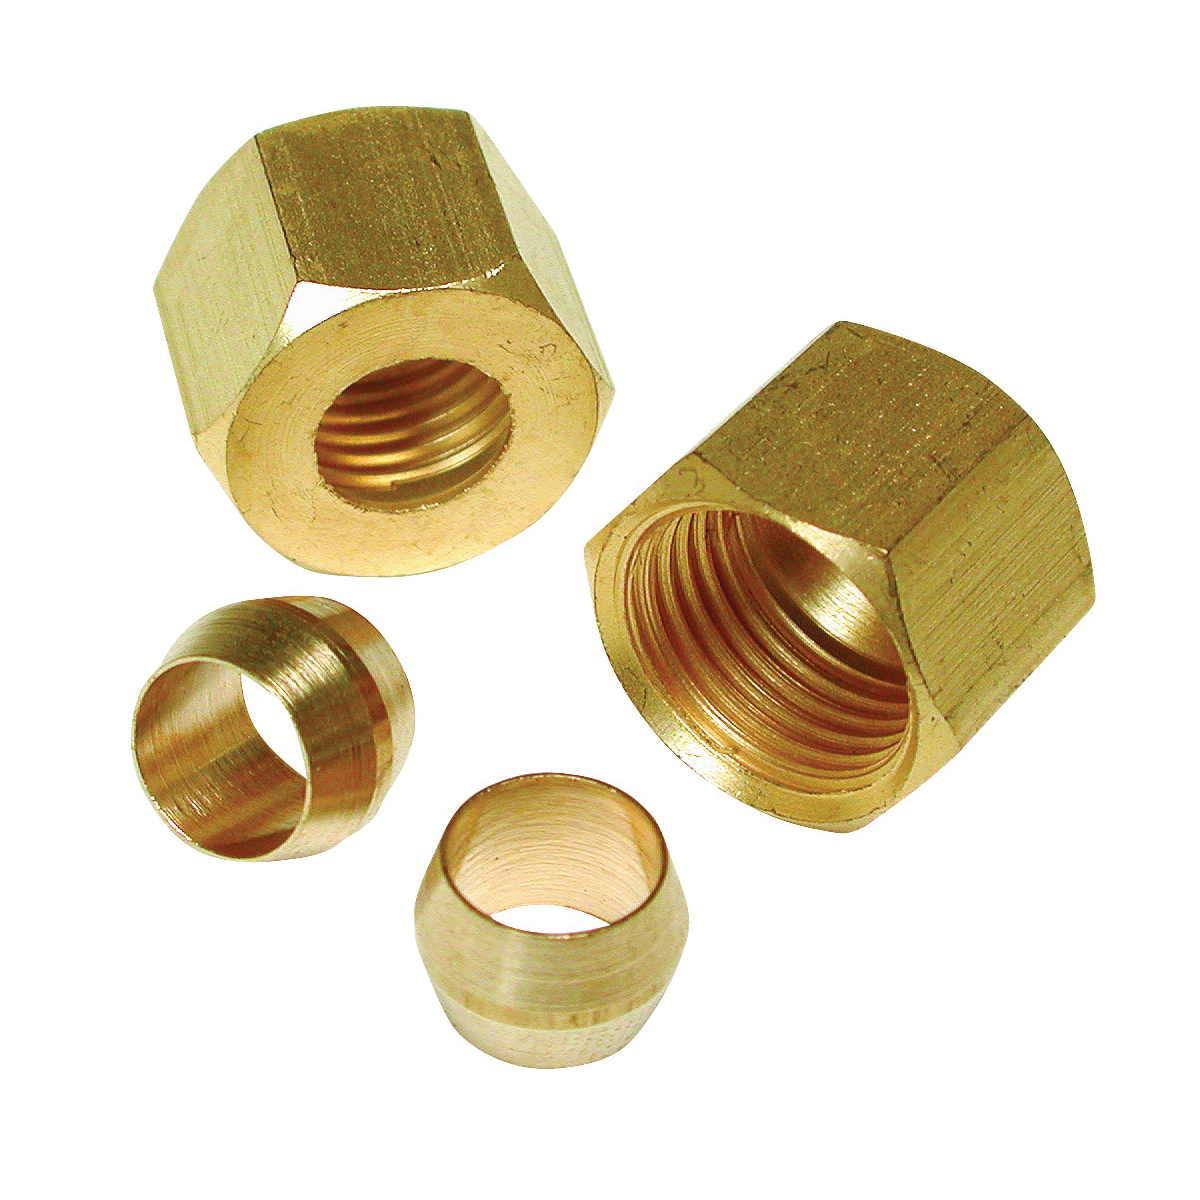 9311 Compression Sleeve and Nut, Brass, For: Evaporative Cooler Purge Systems